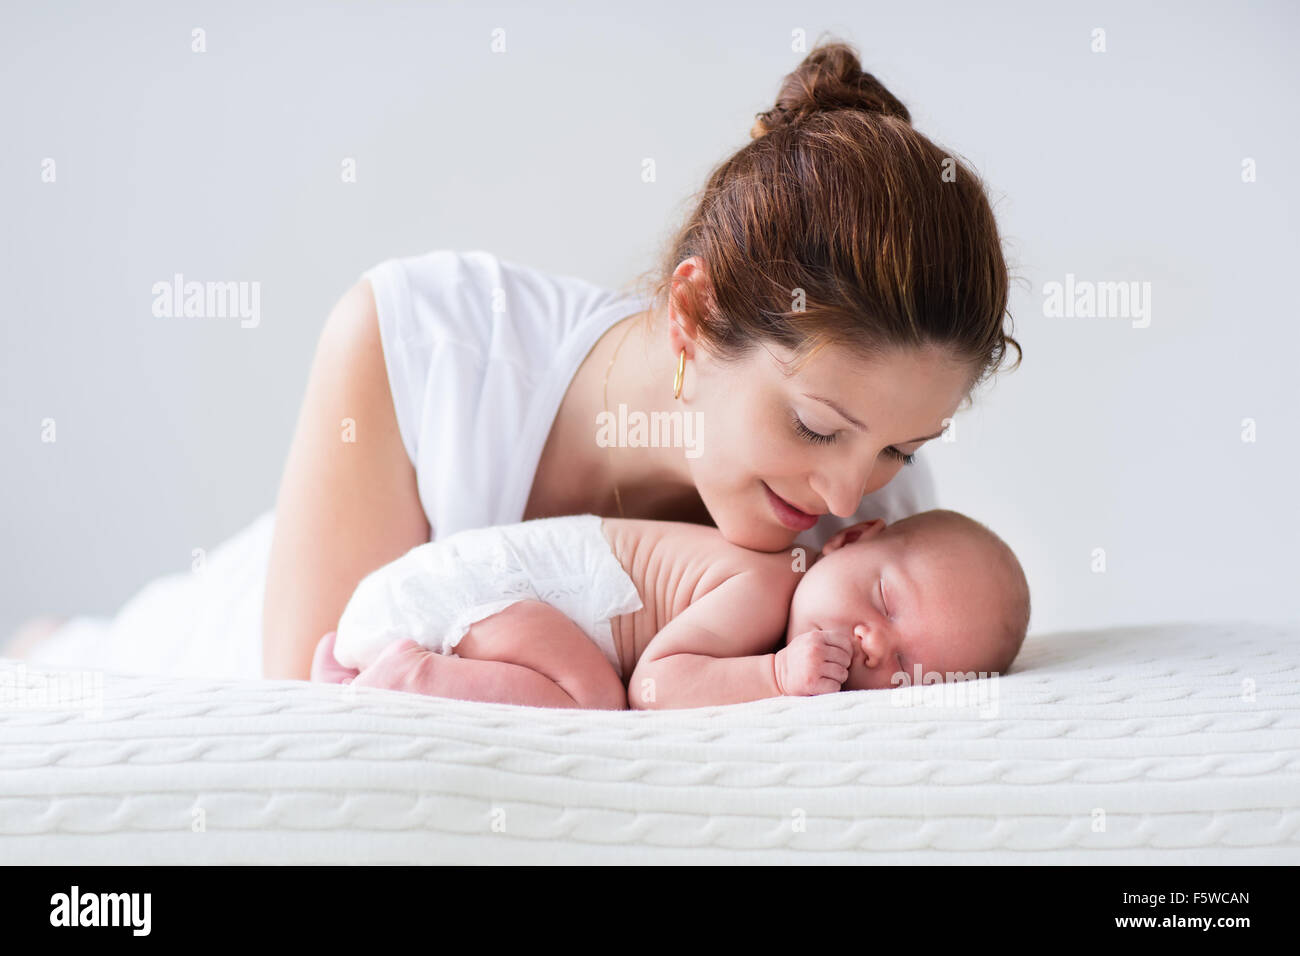 Young mother hugging her newborn child. Mom nursing baby. Woman and new born boy relax in a white bedroom. Family at home. Stock Photo